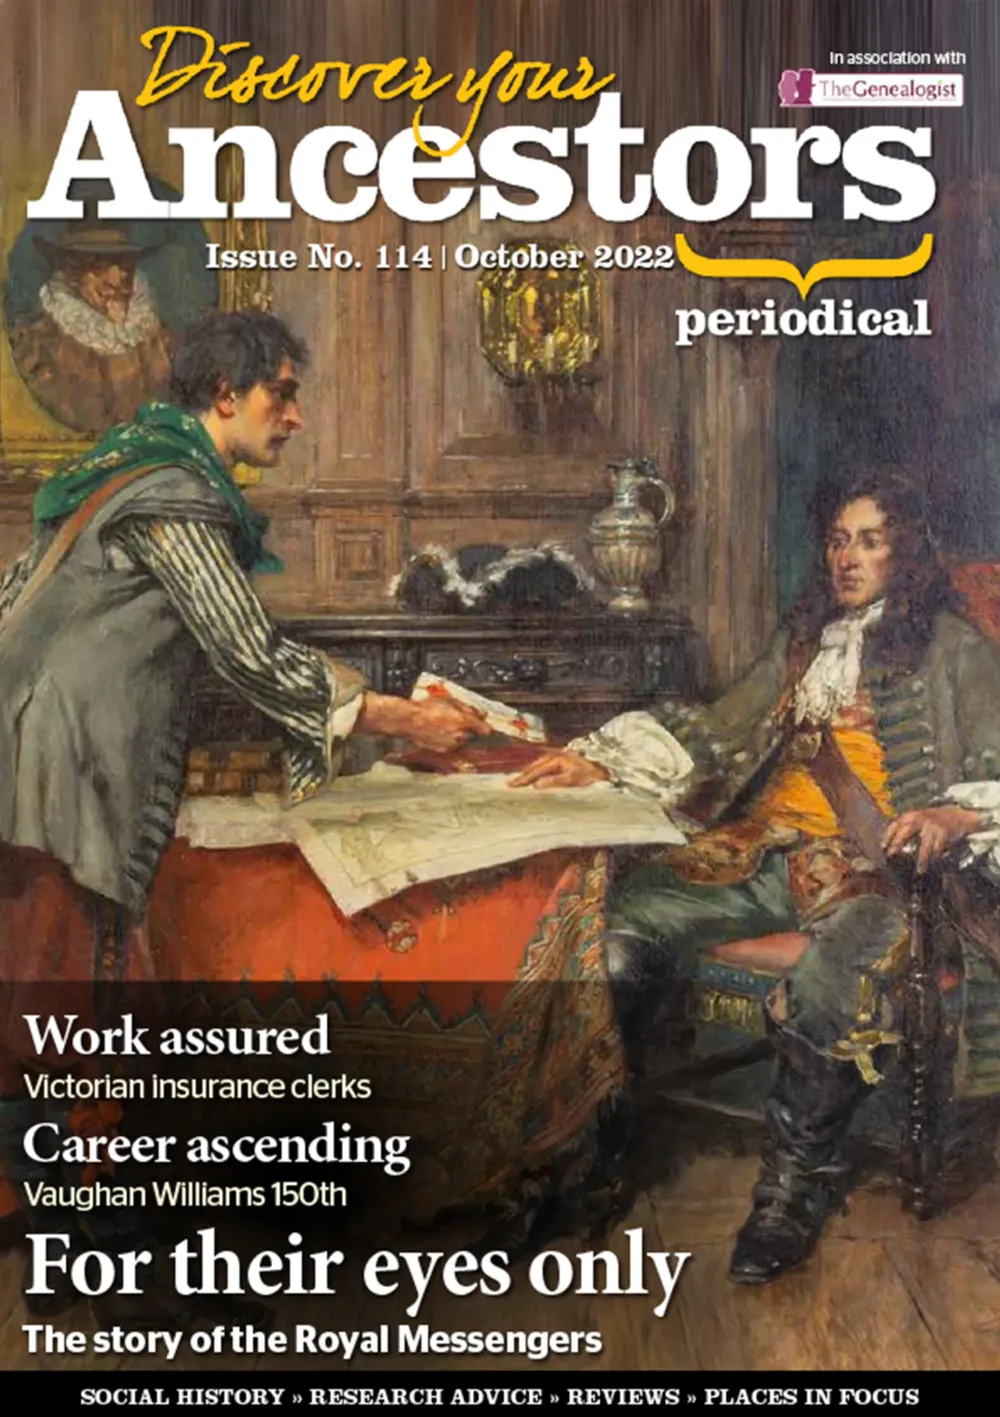 Discover Your Ancestors Periodical - October 2022